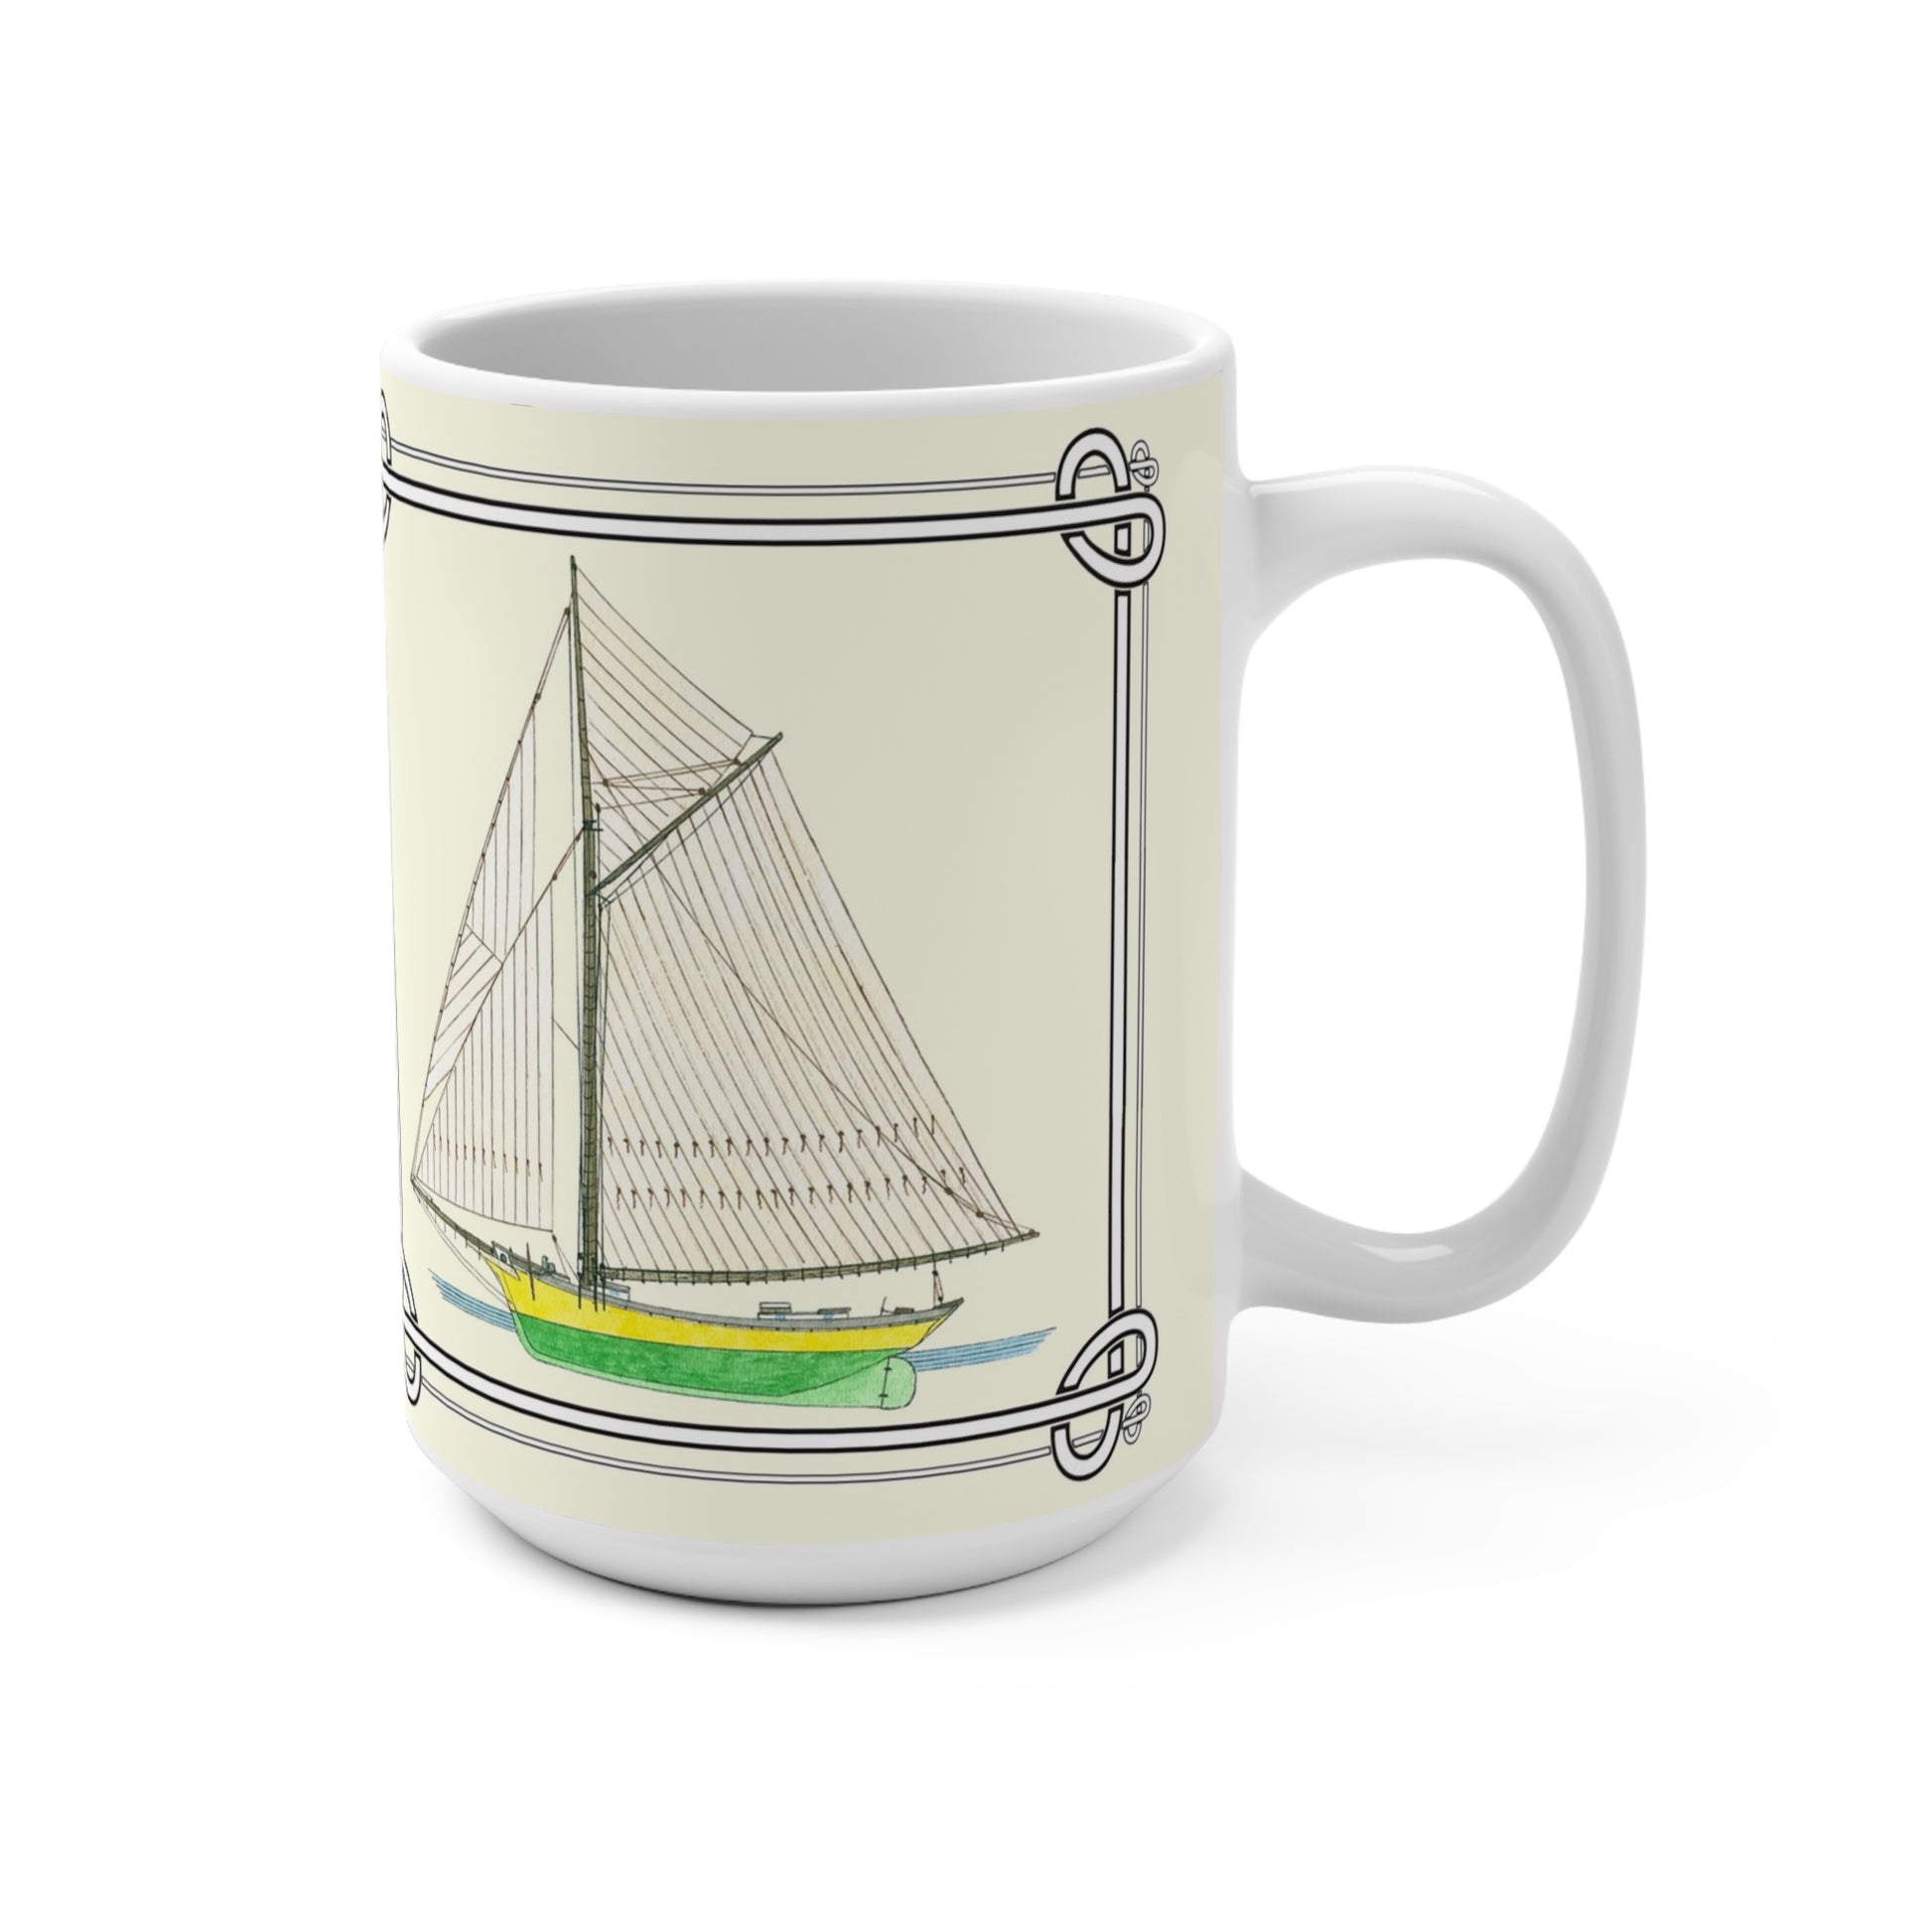 The Emma C. Berry was a Noank Fishing Wall Smack. A great gift for those who love all things nautical.